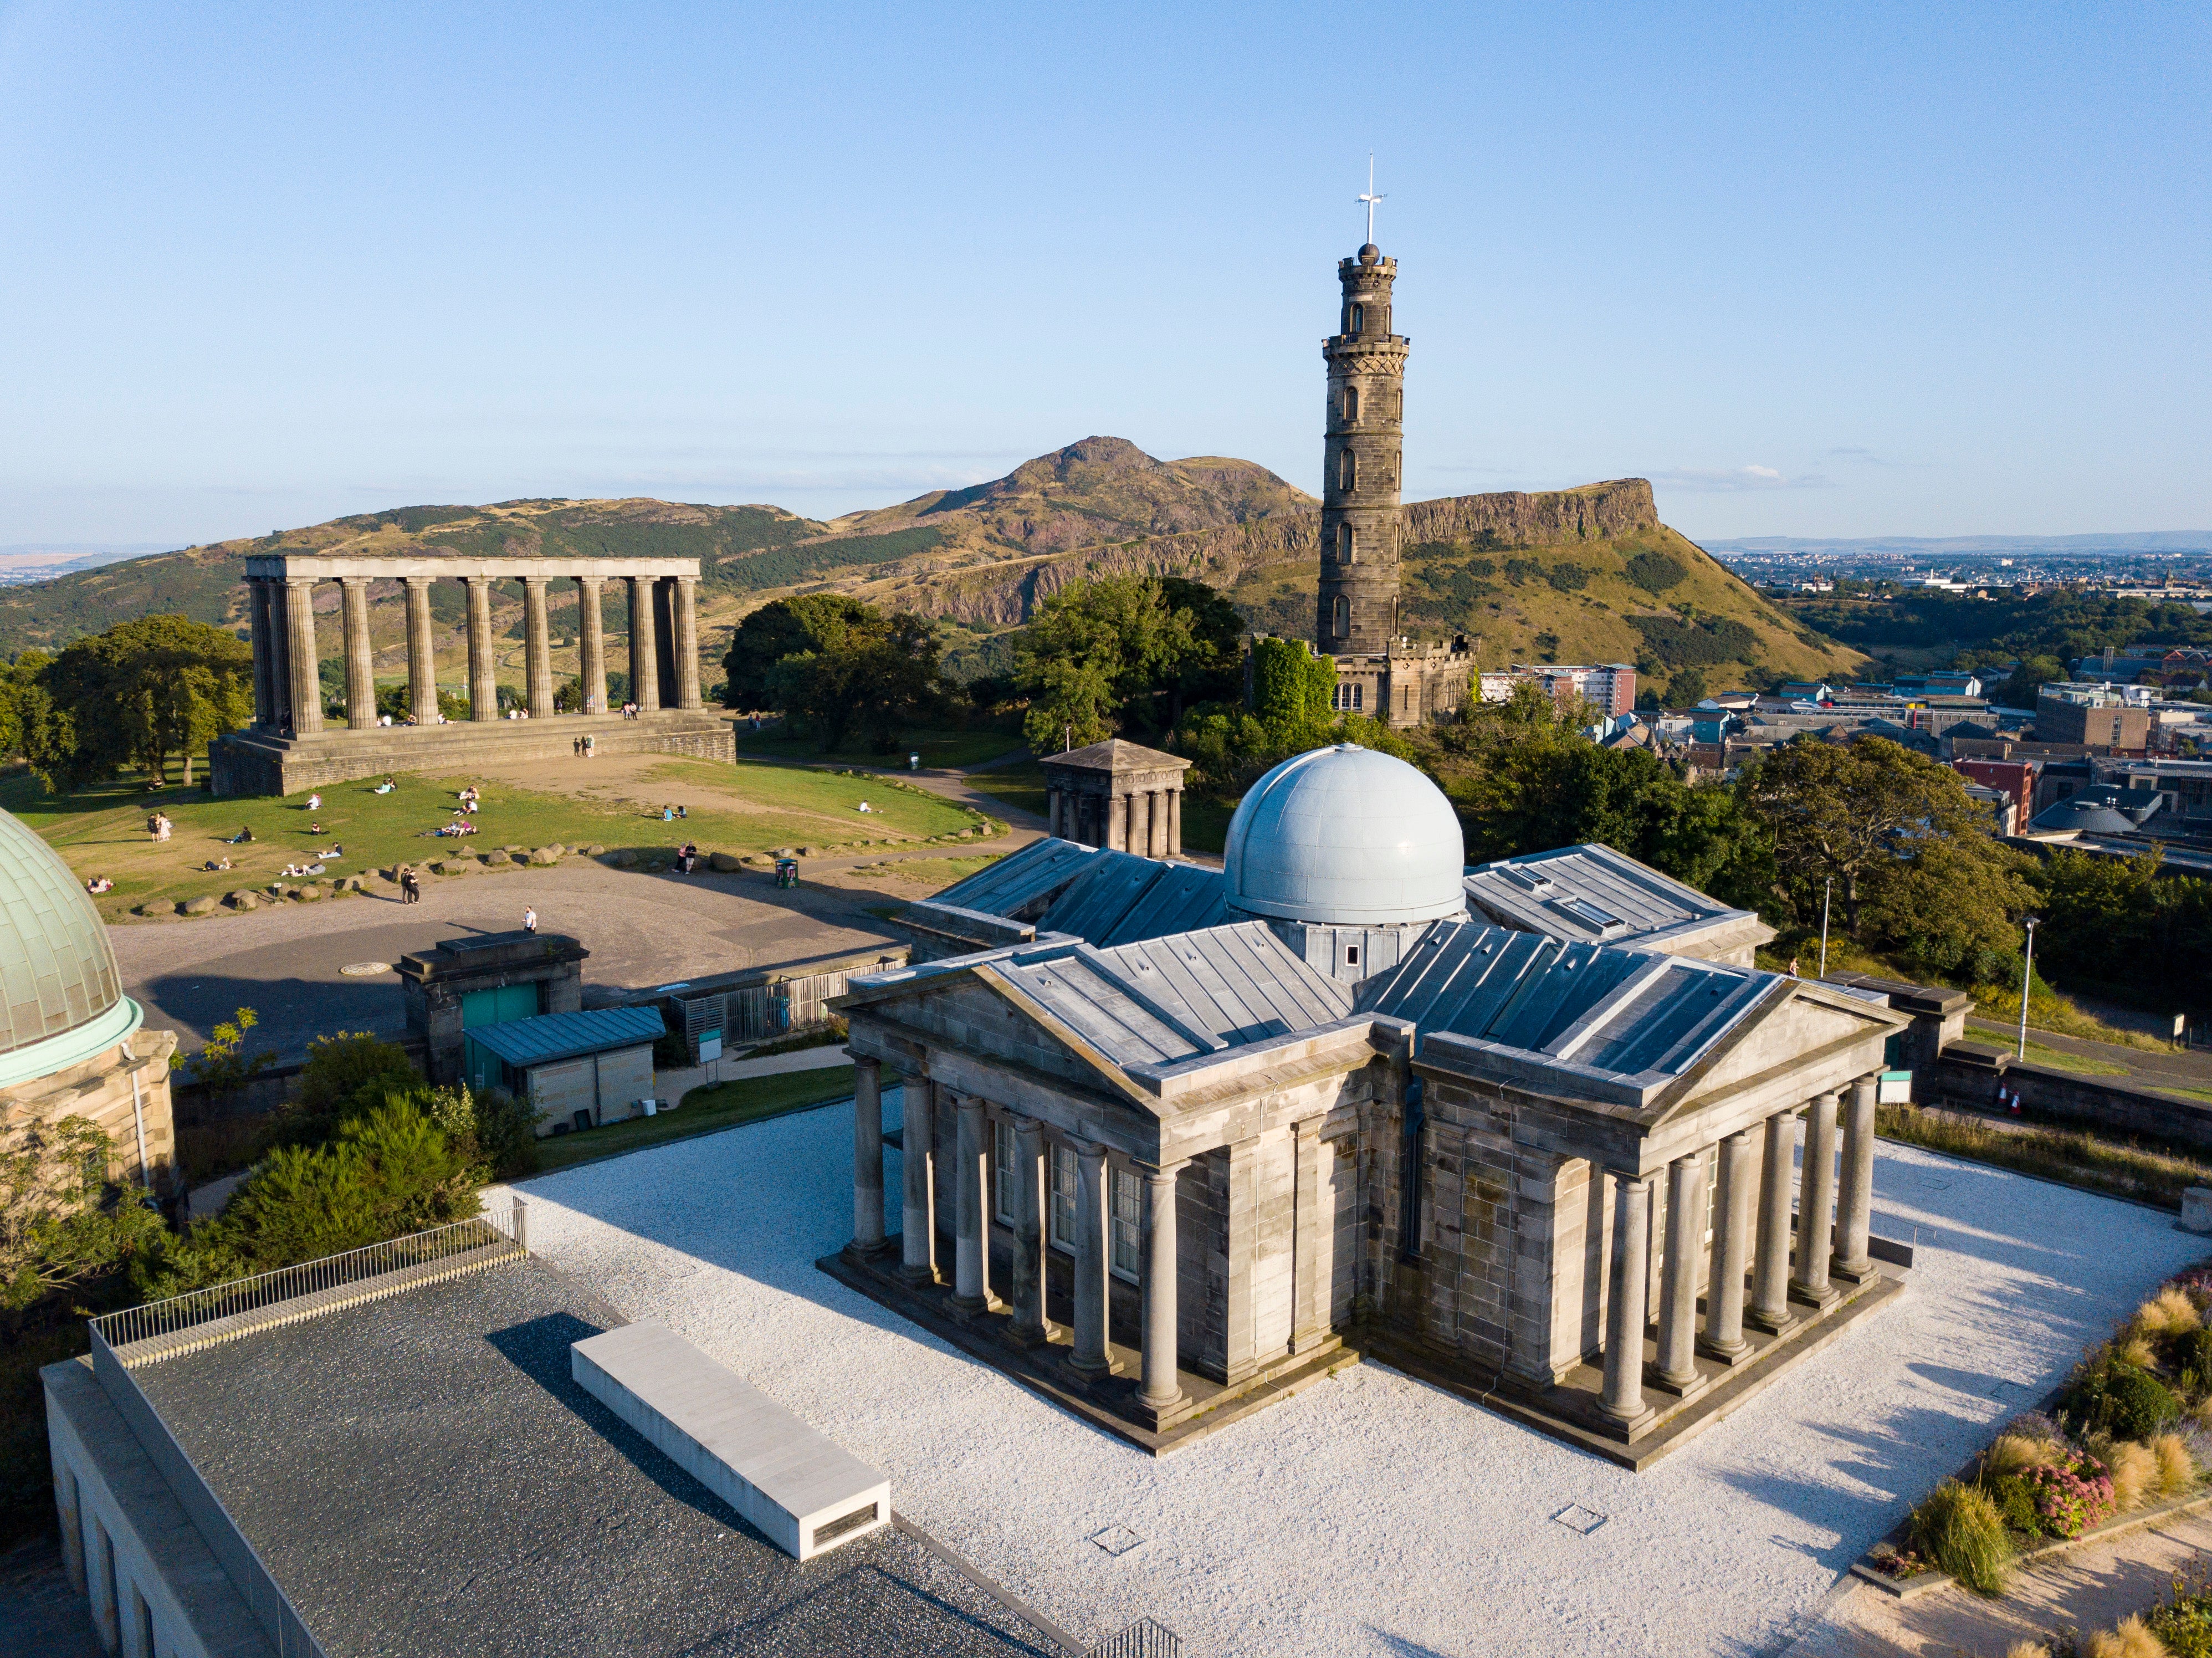 Collective Gallery, Calton Hill and Arthur's Seat